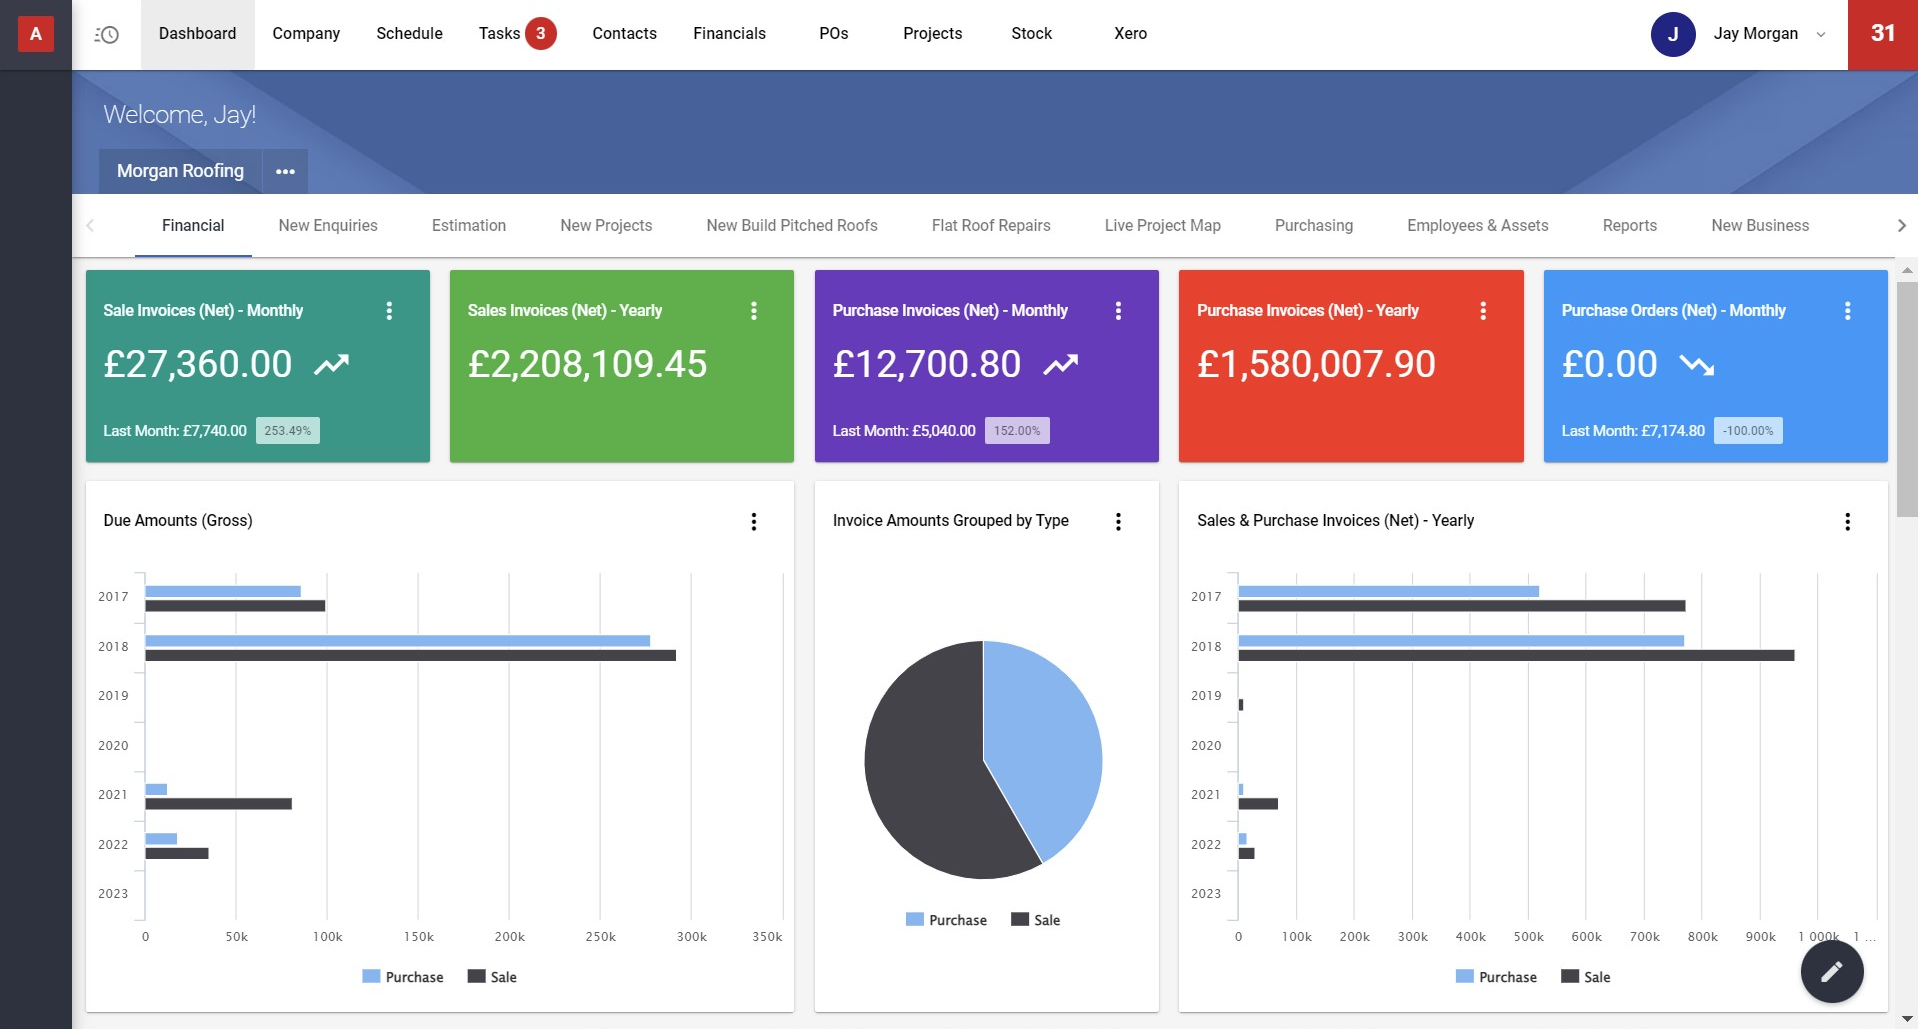 Financial reports visible in Archdesk software